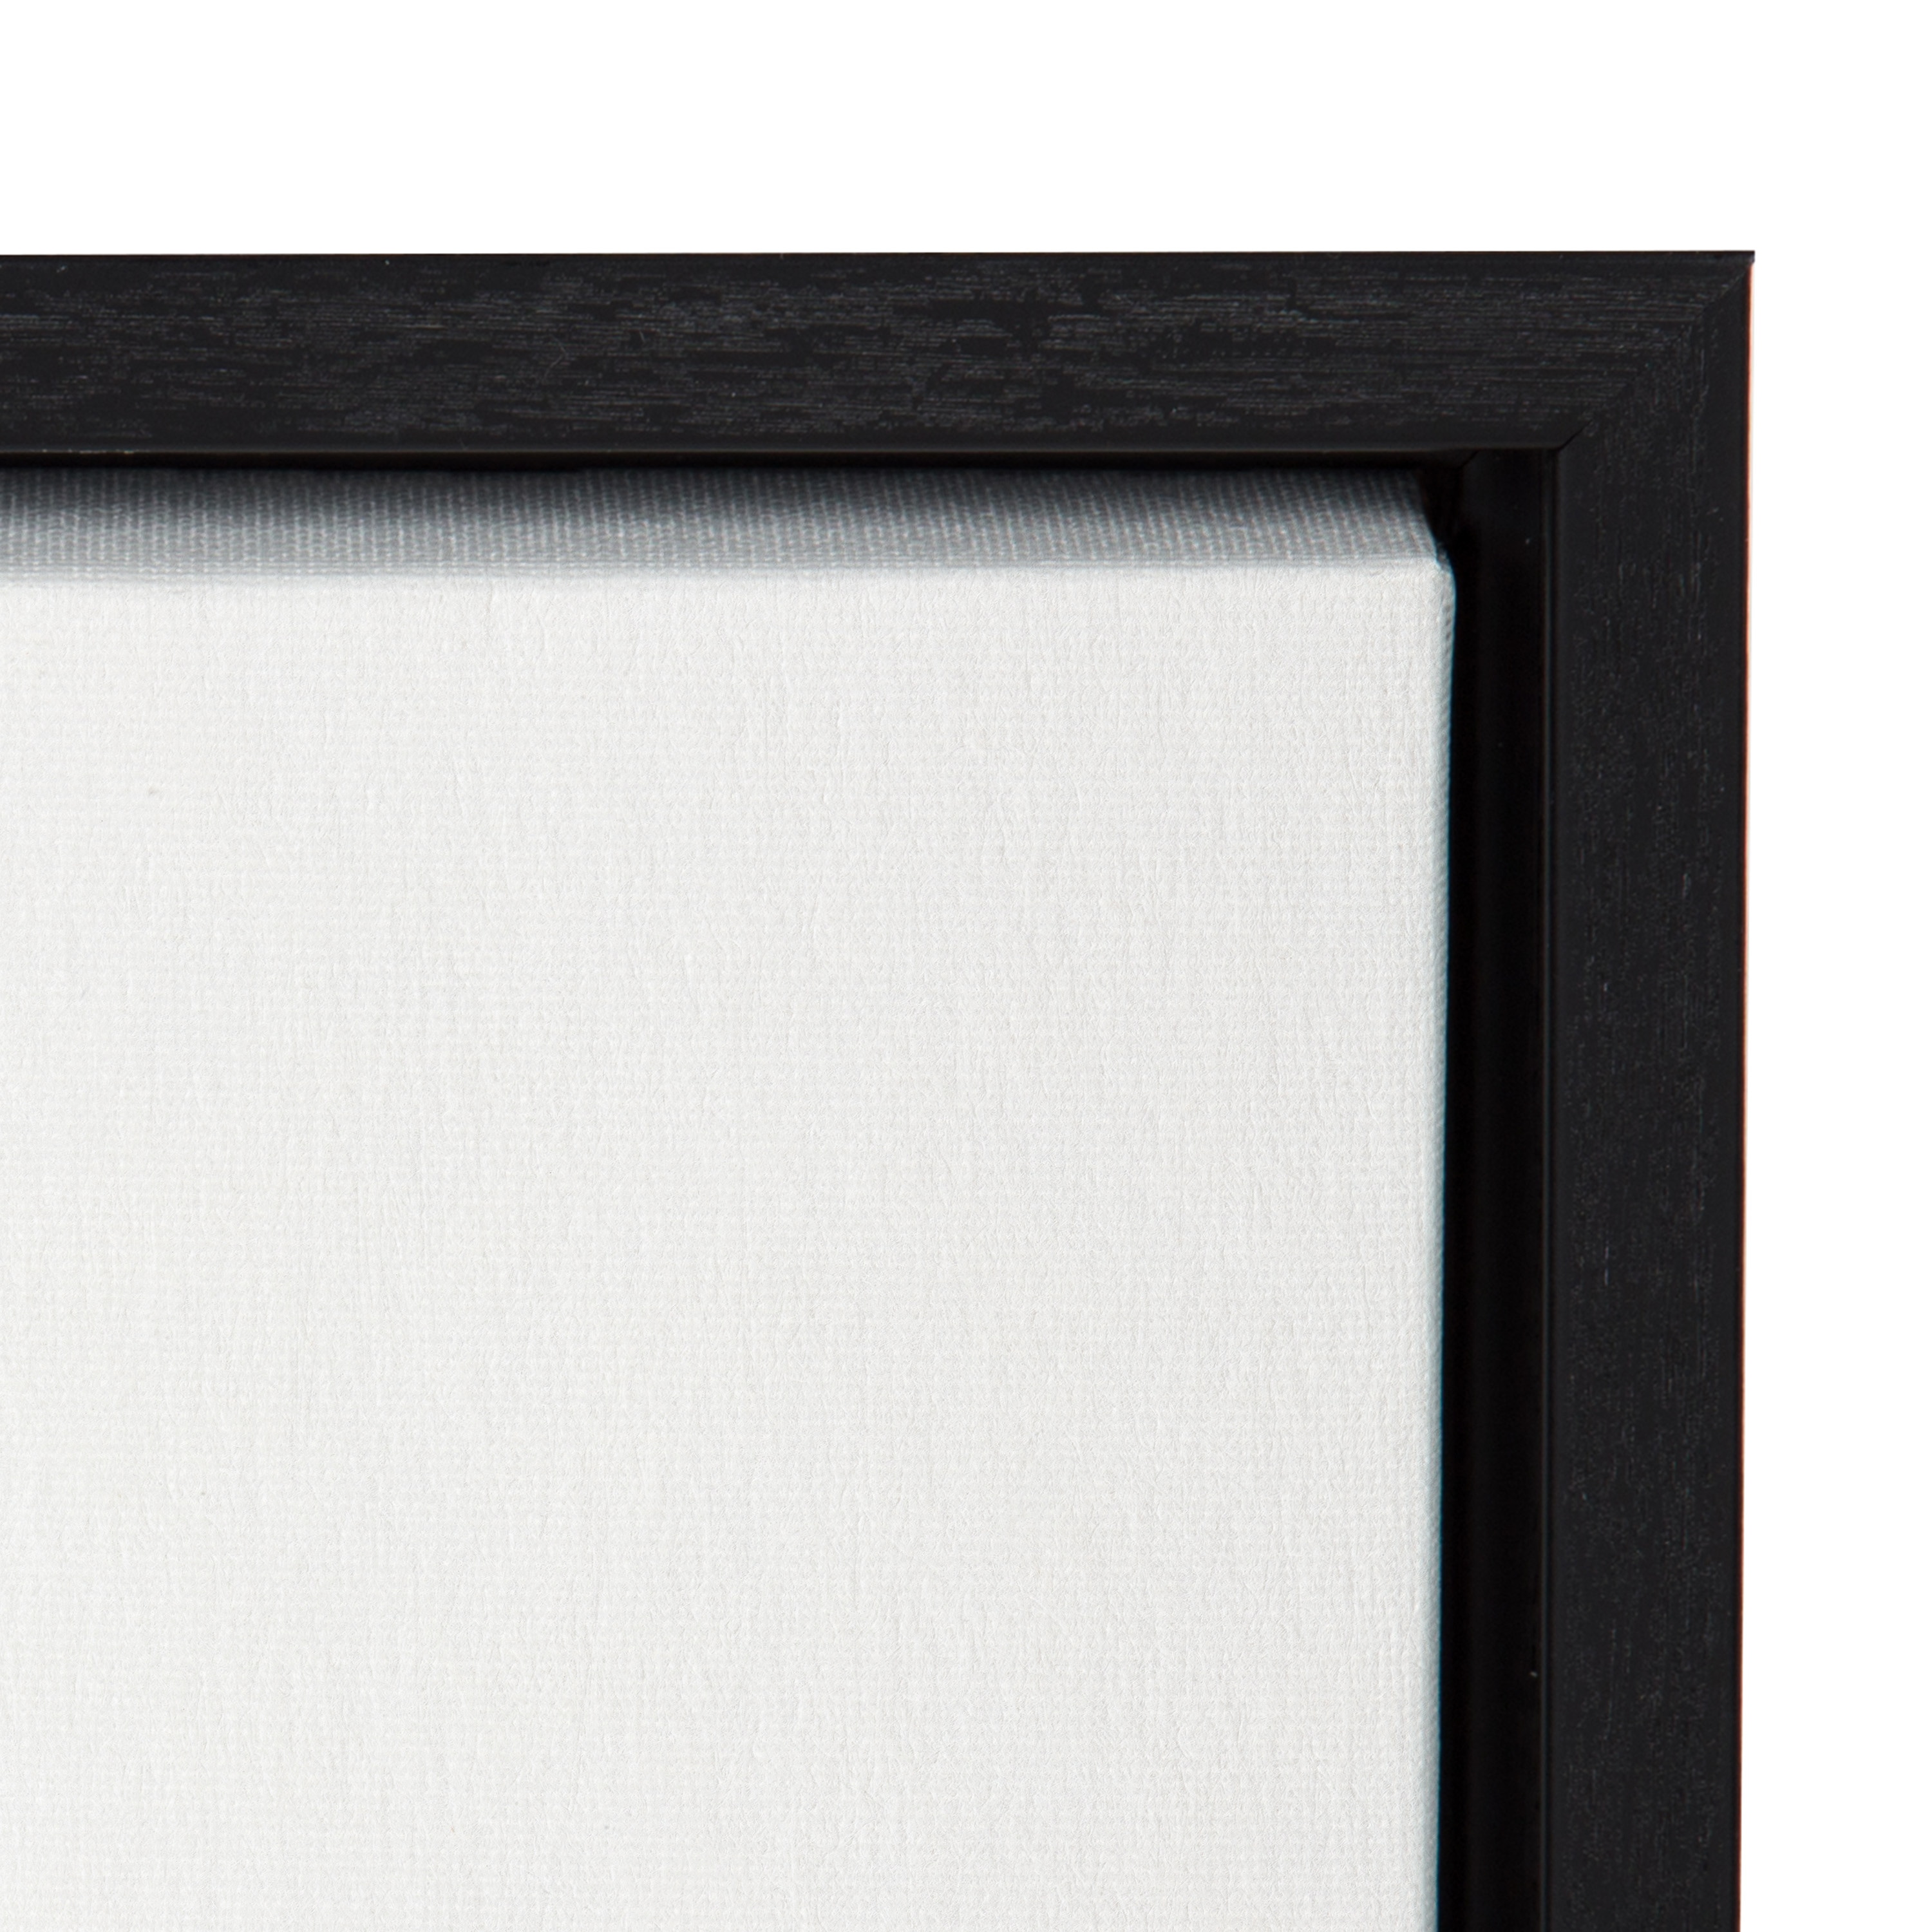 Kate and Laurel The Creative Bunch Studio Black Framed 24-in H x 18-in ...